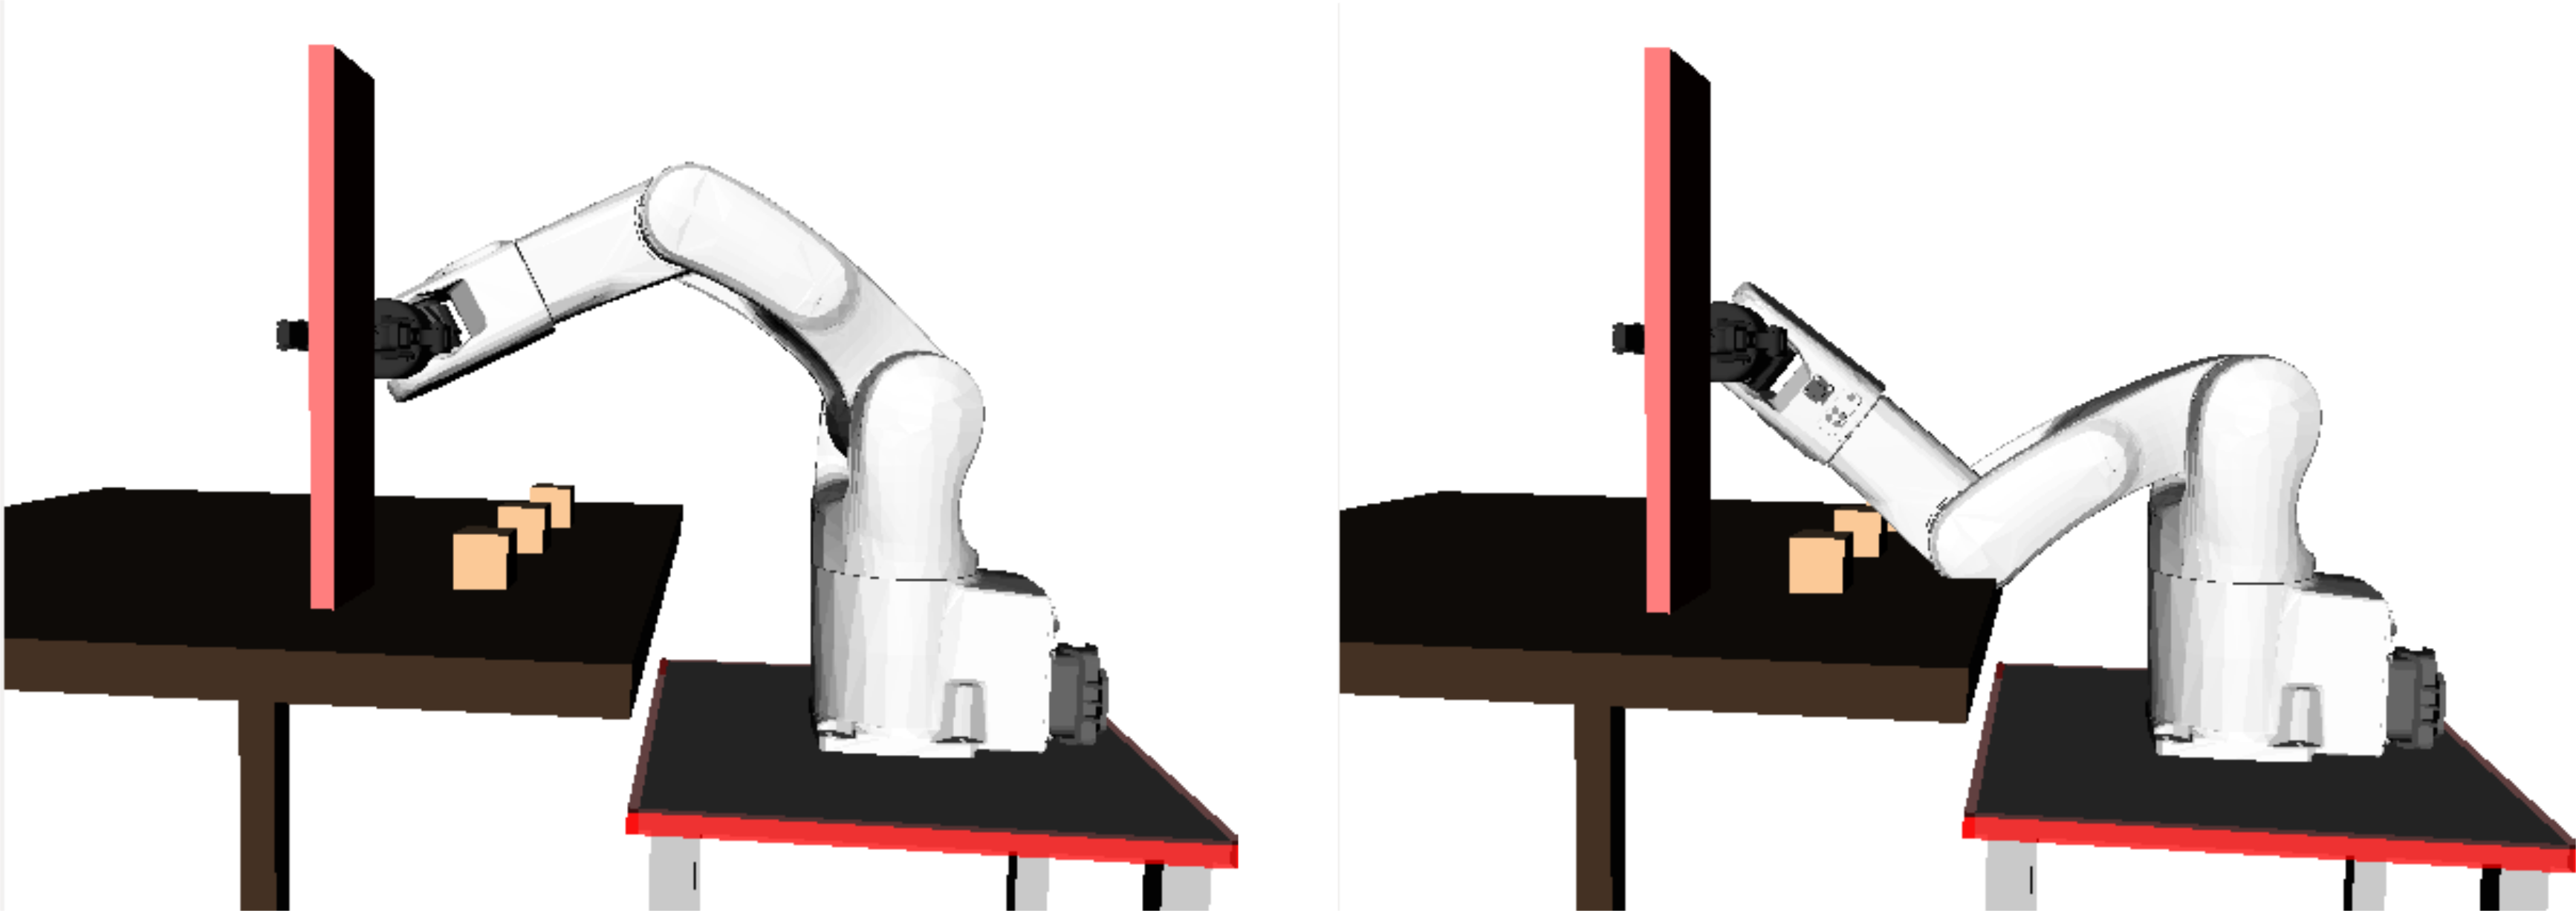 Two IK solutions returned by IKFast. Left: IK solution number 1. Right : IK solution number 0. Note that IK solution number 0 involves a collision of the elbow with the table.